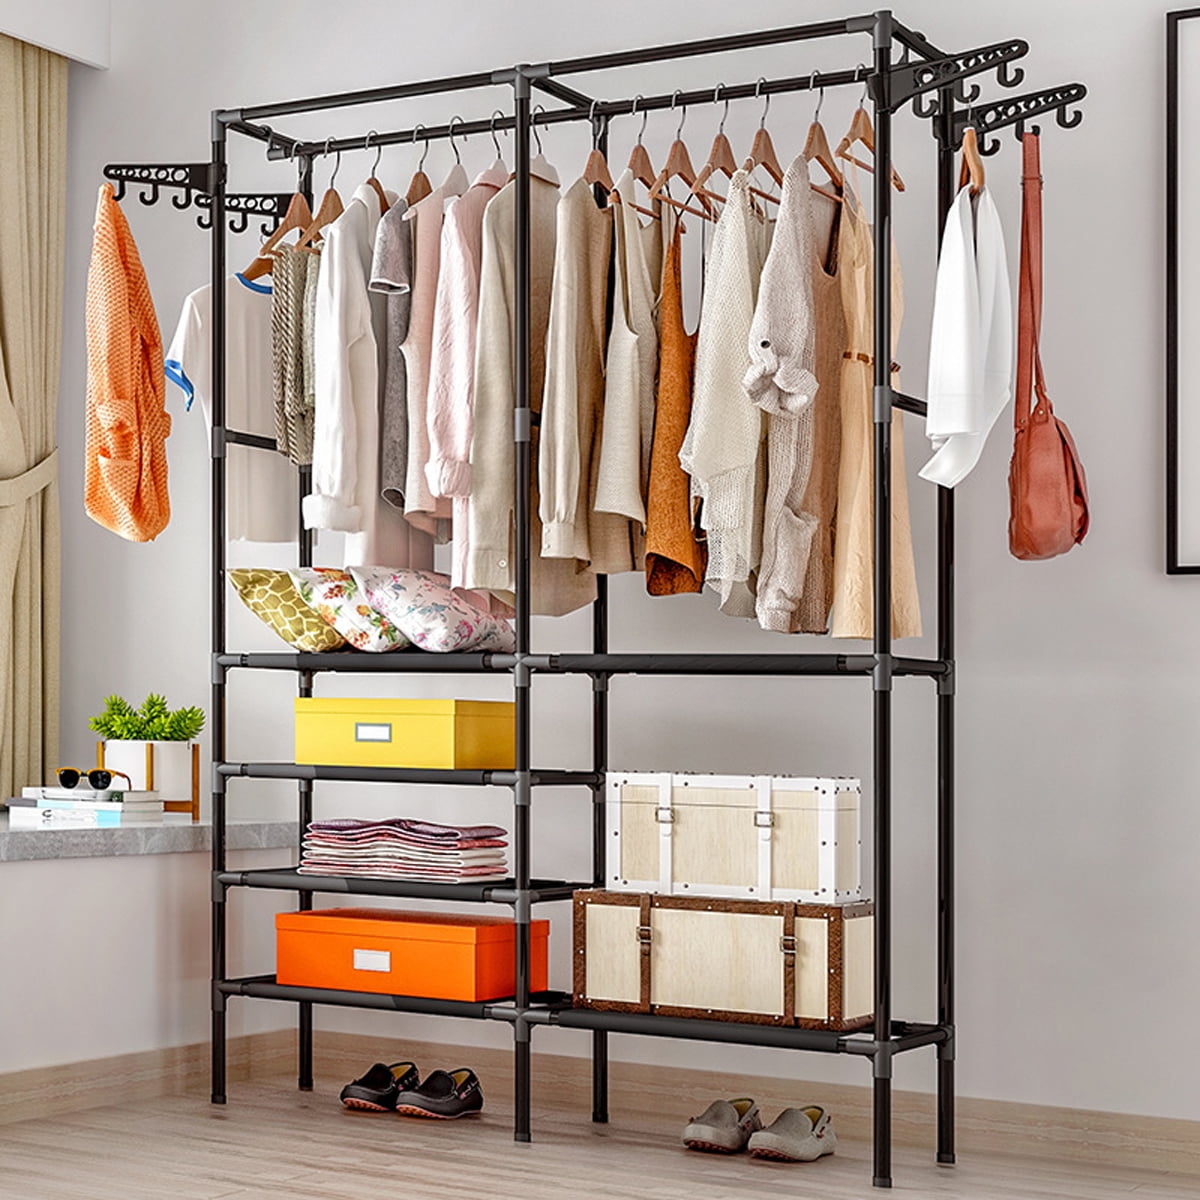 4 Side Hooks and Shoe Rack Storage Black for Bedroom DUMEE Free Standing Clothes Rail Heavy Duty Clothes Rack with 2 Tier Shelves Cabinet Wardrobe Closet Organzier